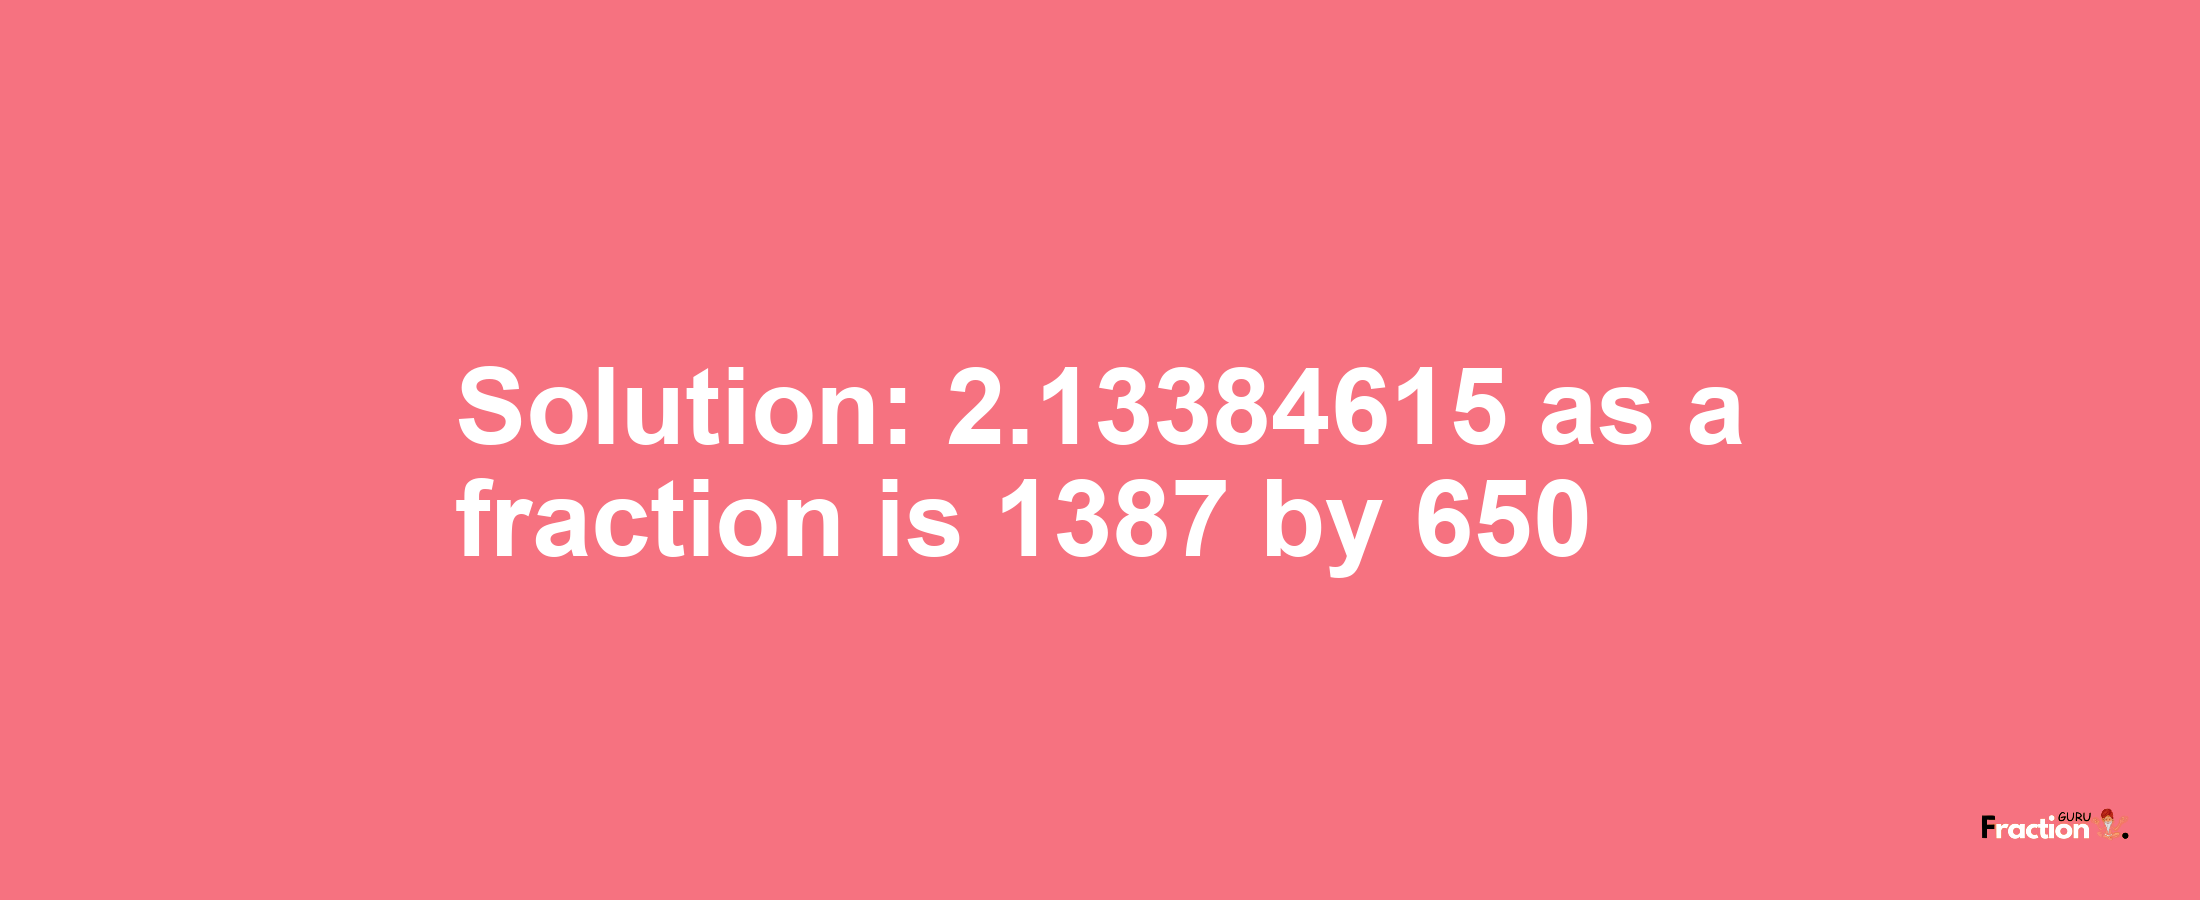 Solution:2.13384615 as a fraction is 1387/650